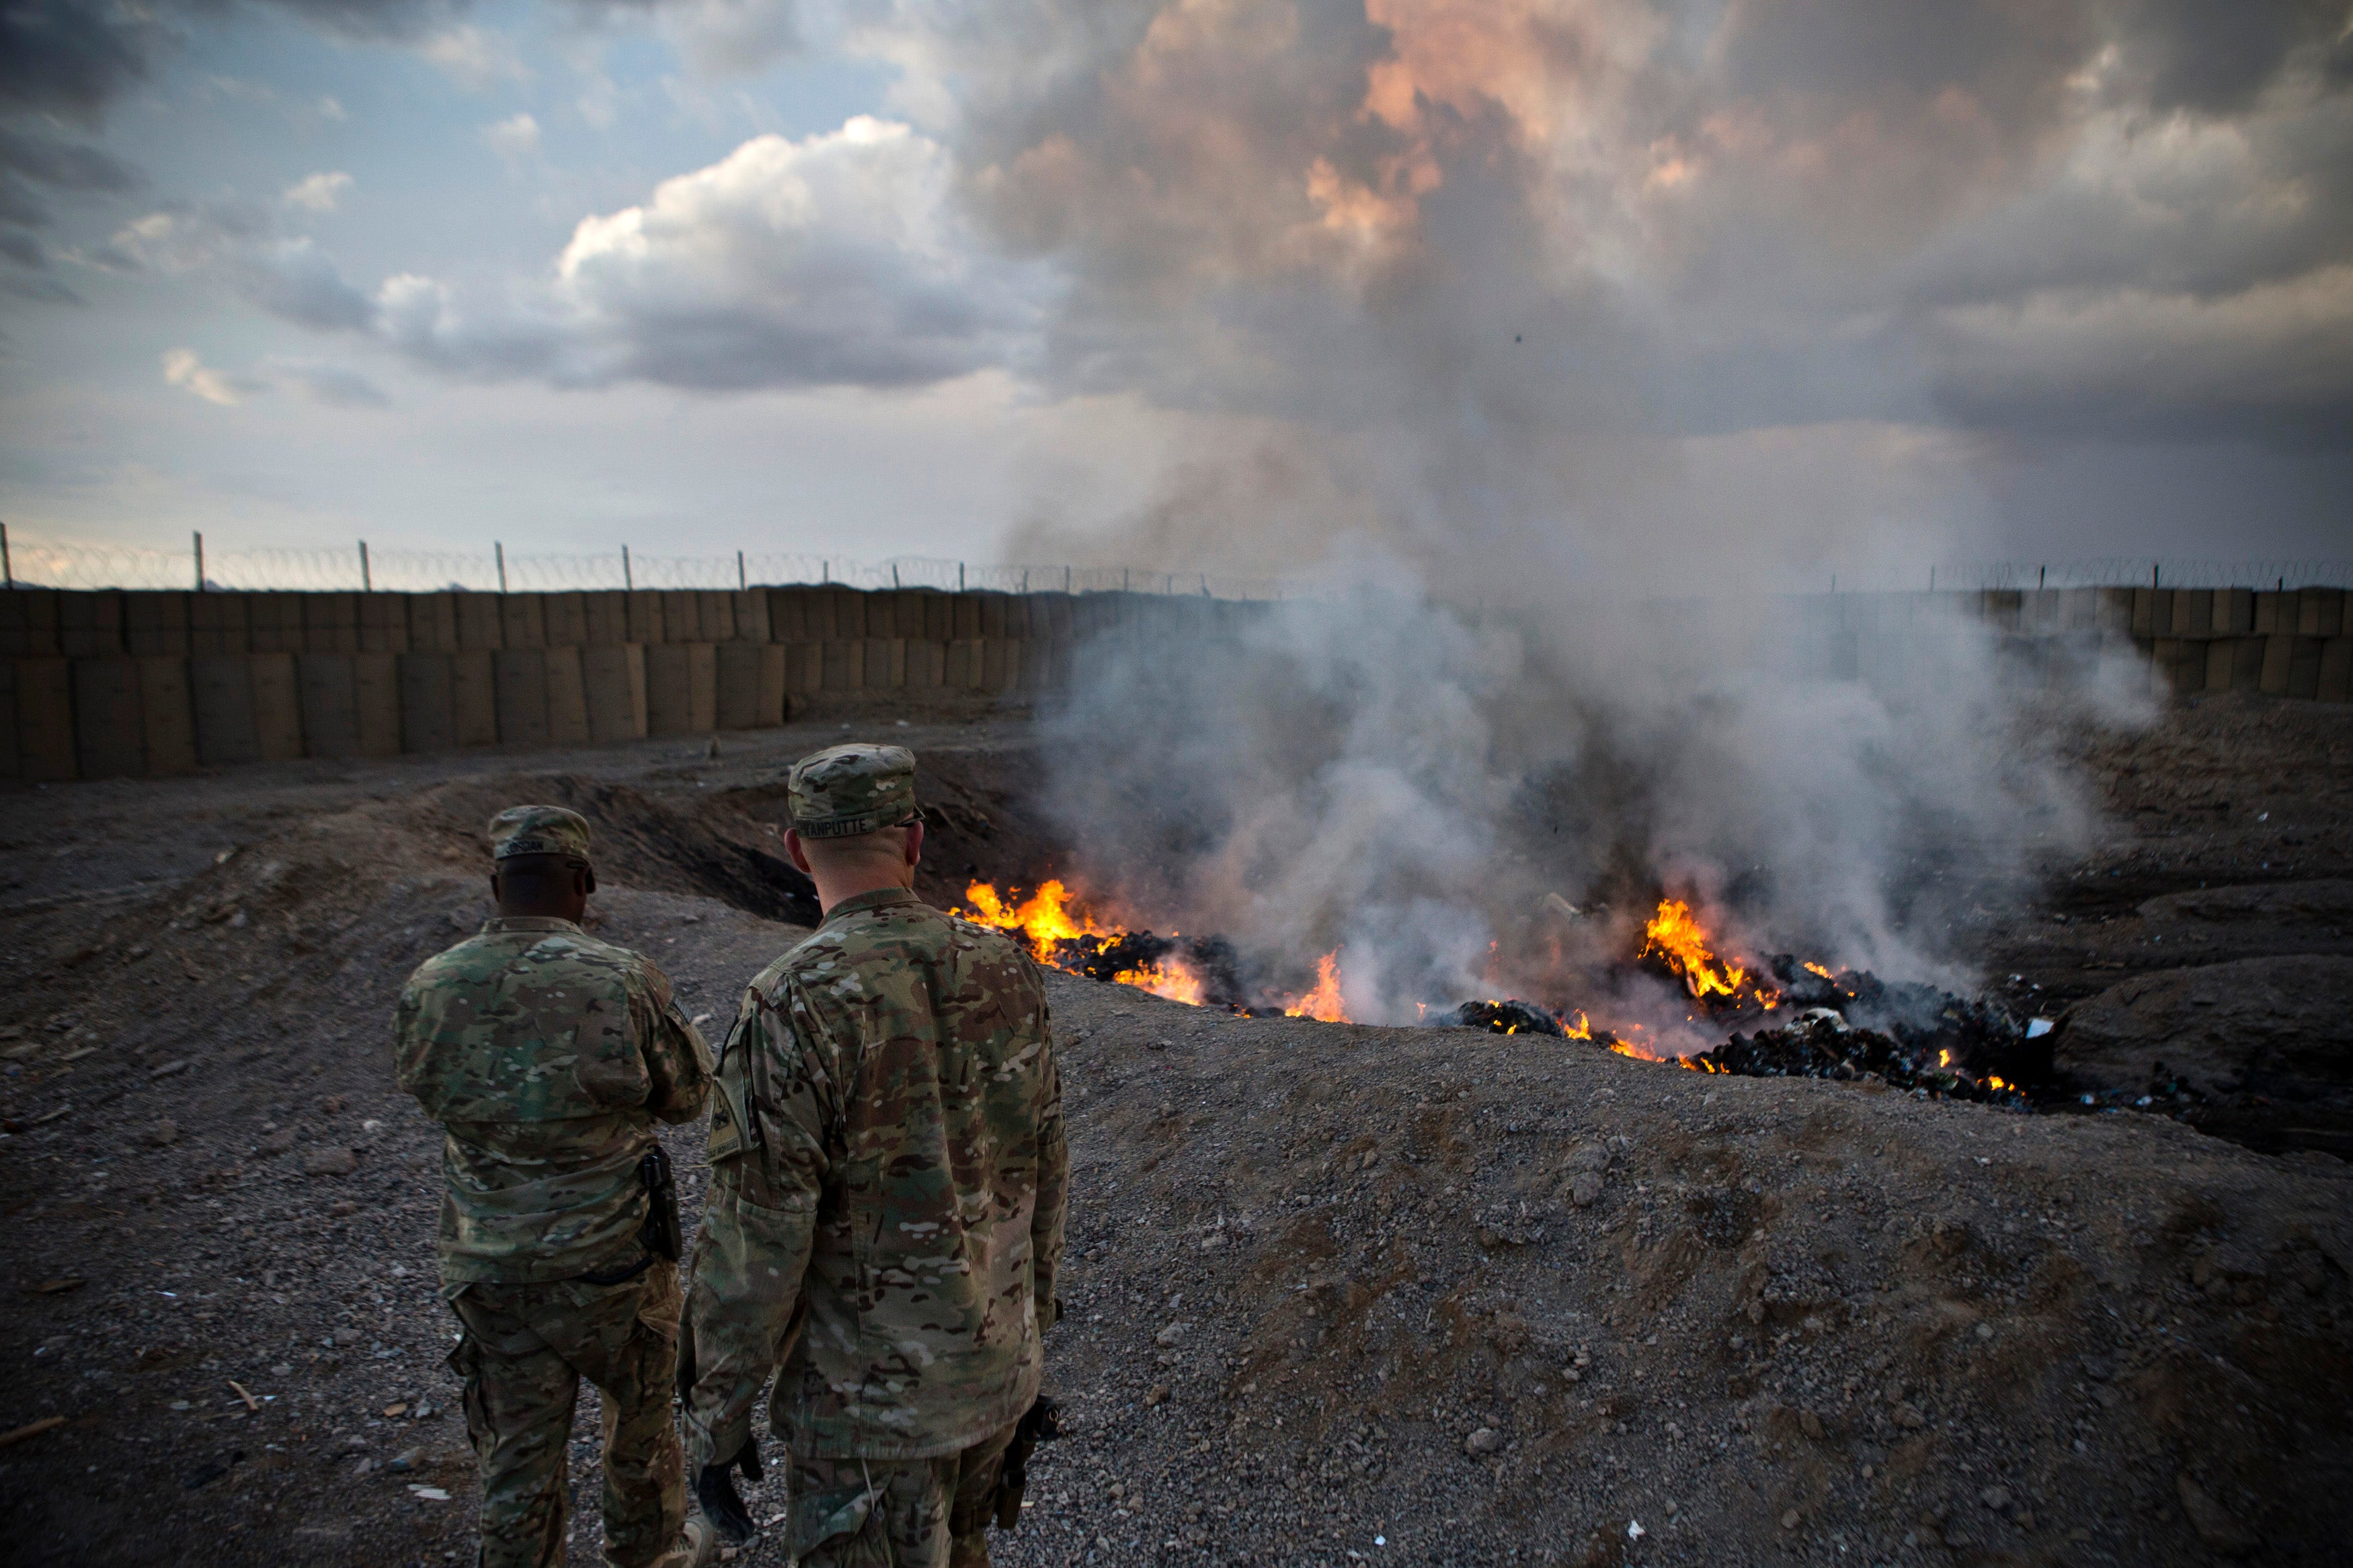 VA cutting hurdles to vets' claims over toxic burn pit exposure in Iraq, Afghanistan